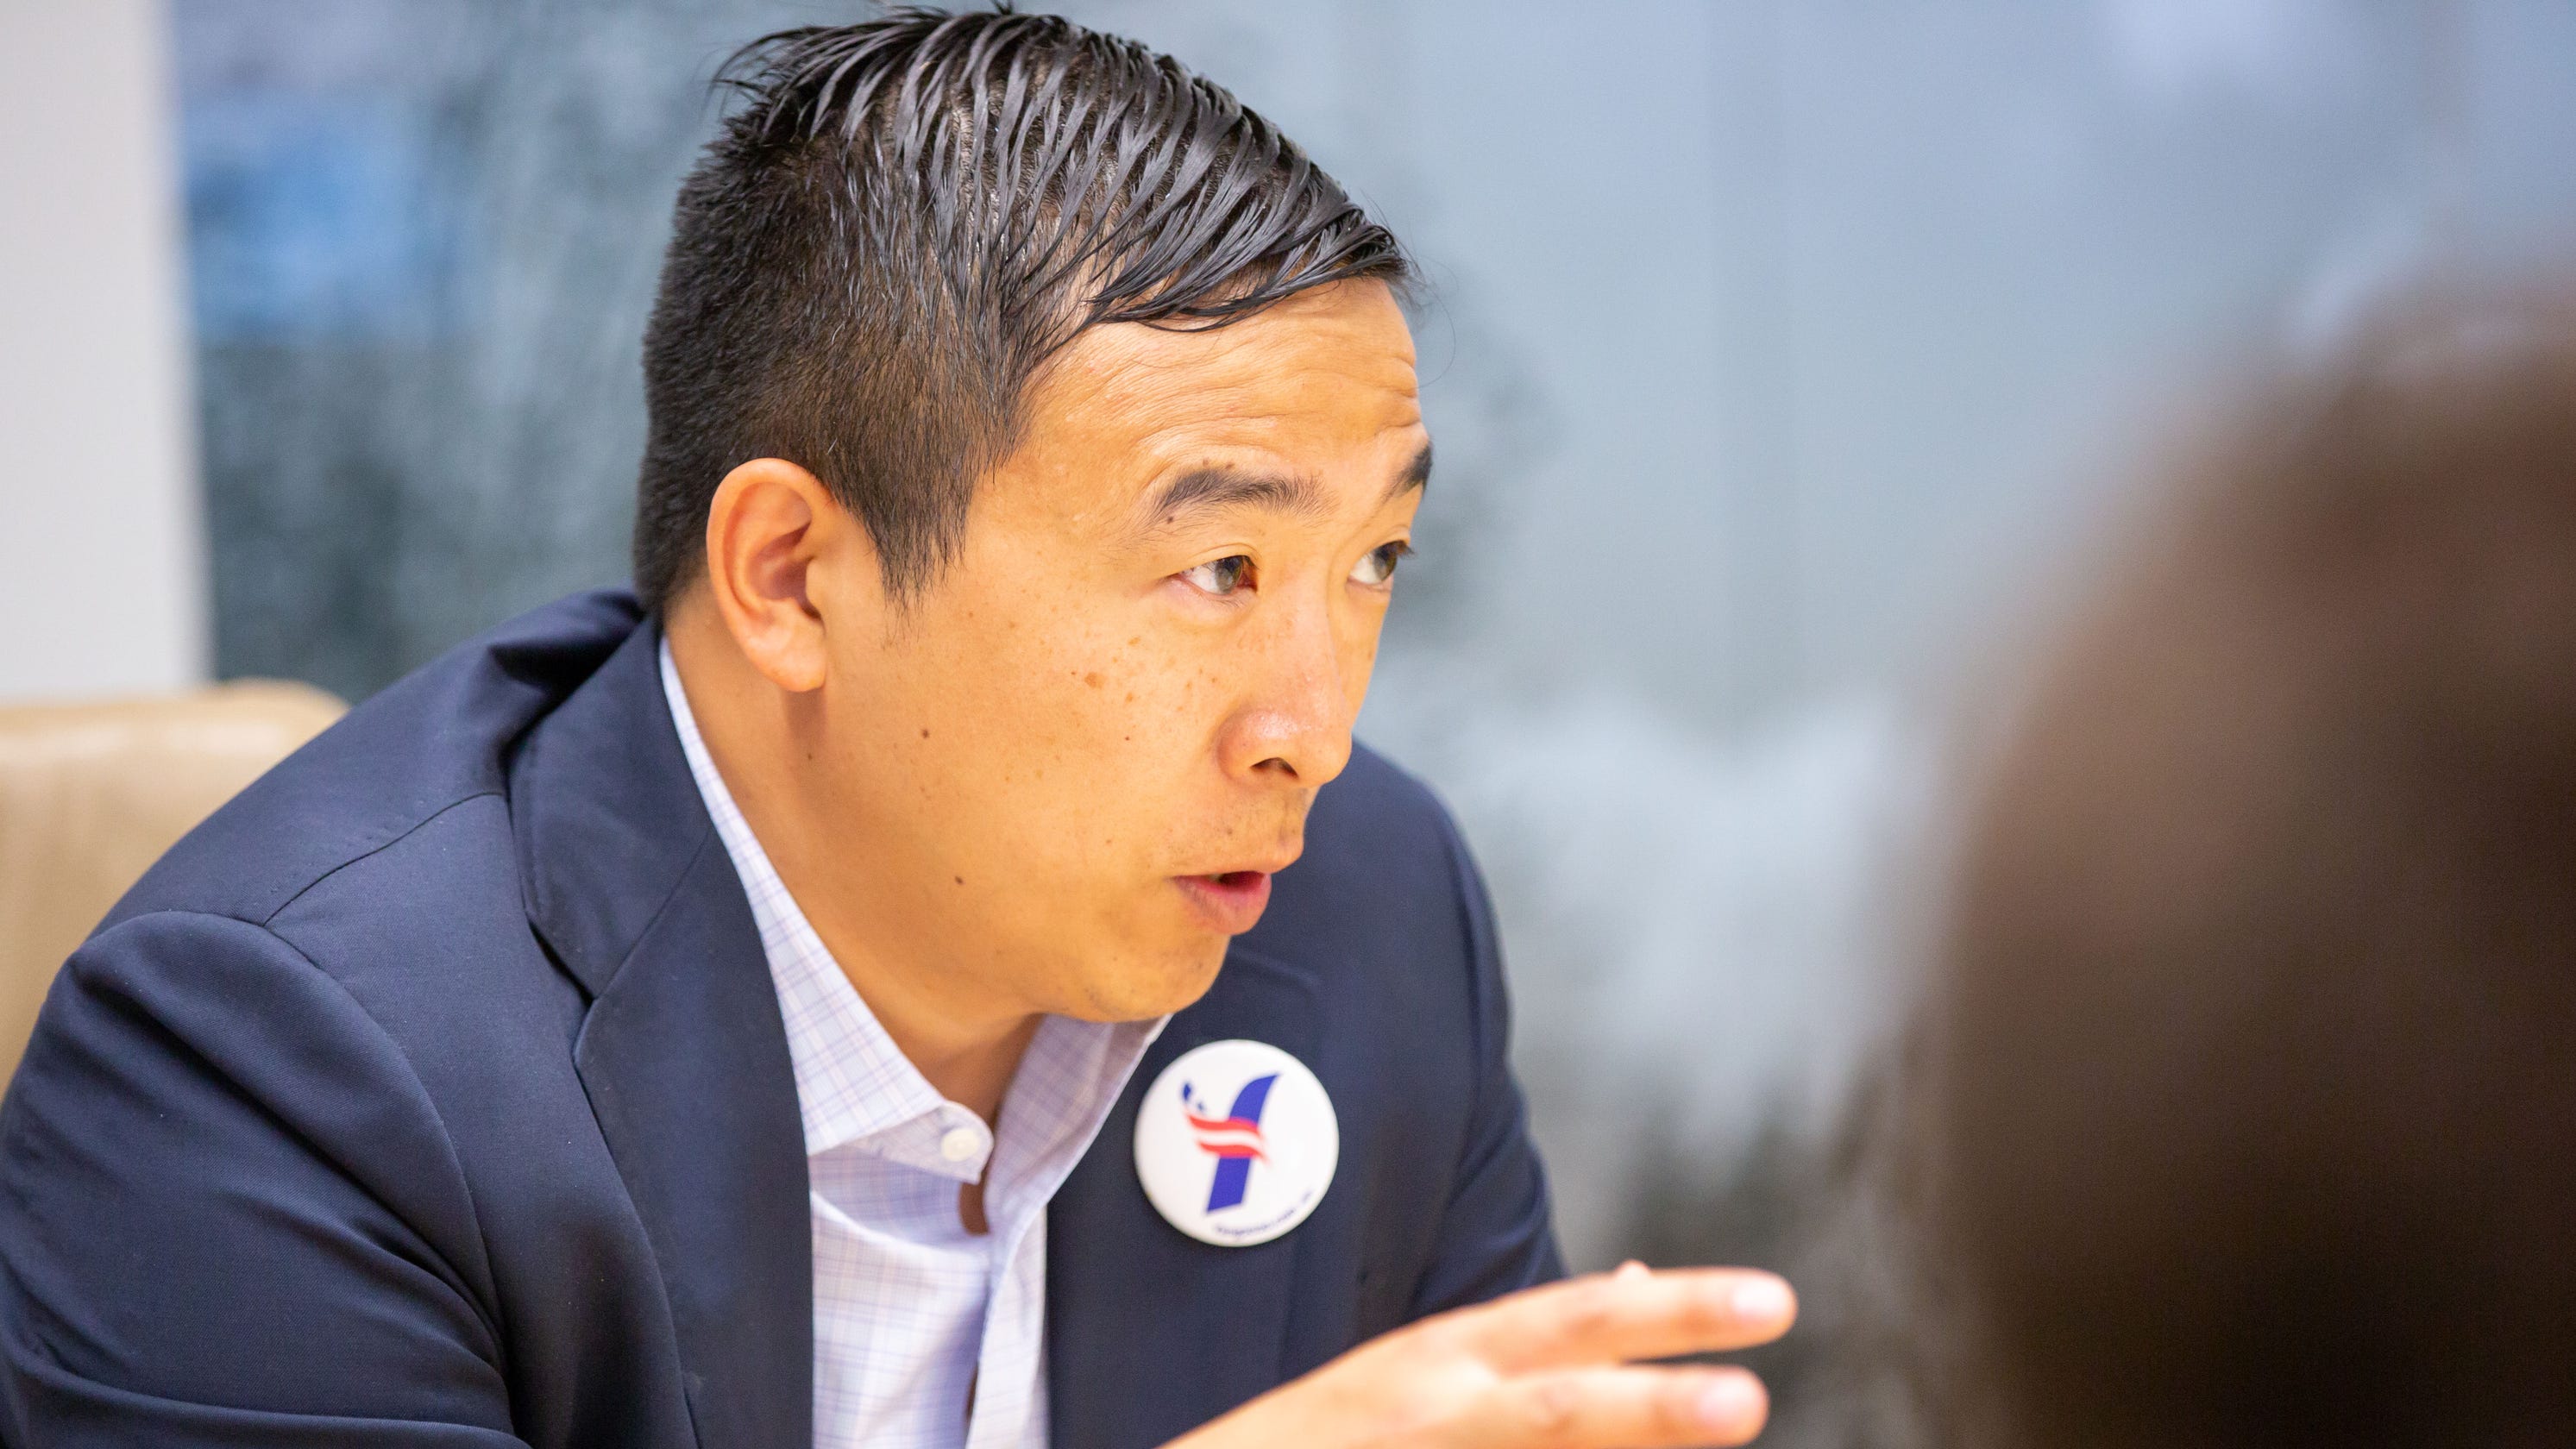 Tech nerd with a heart: Voters should give Andrew Yang's ideas a look2986 x 1680